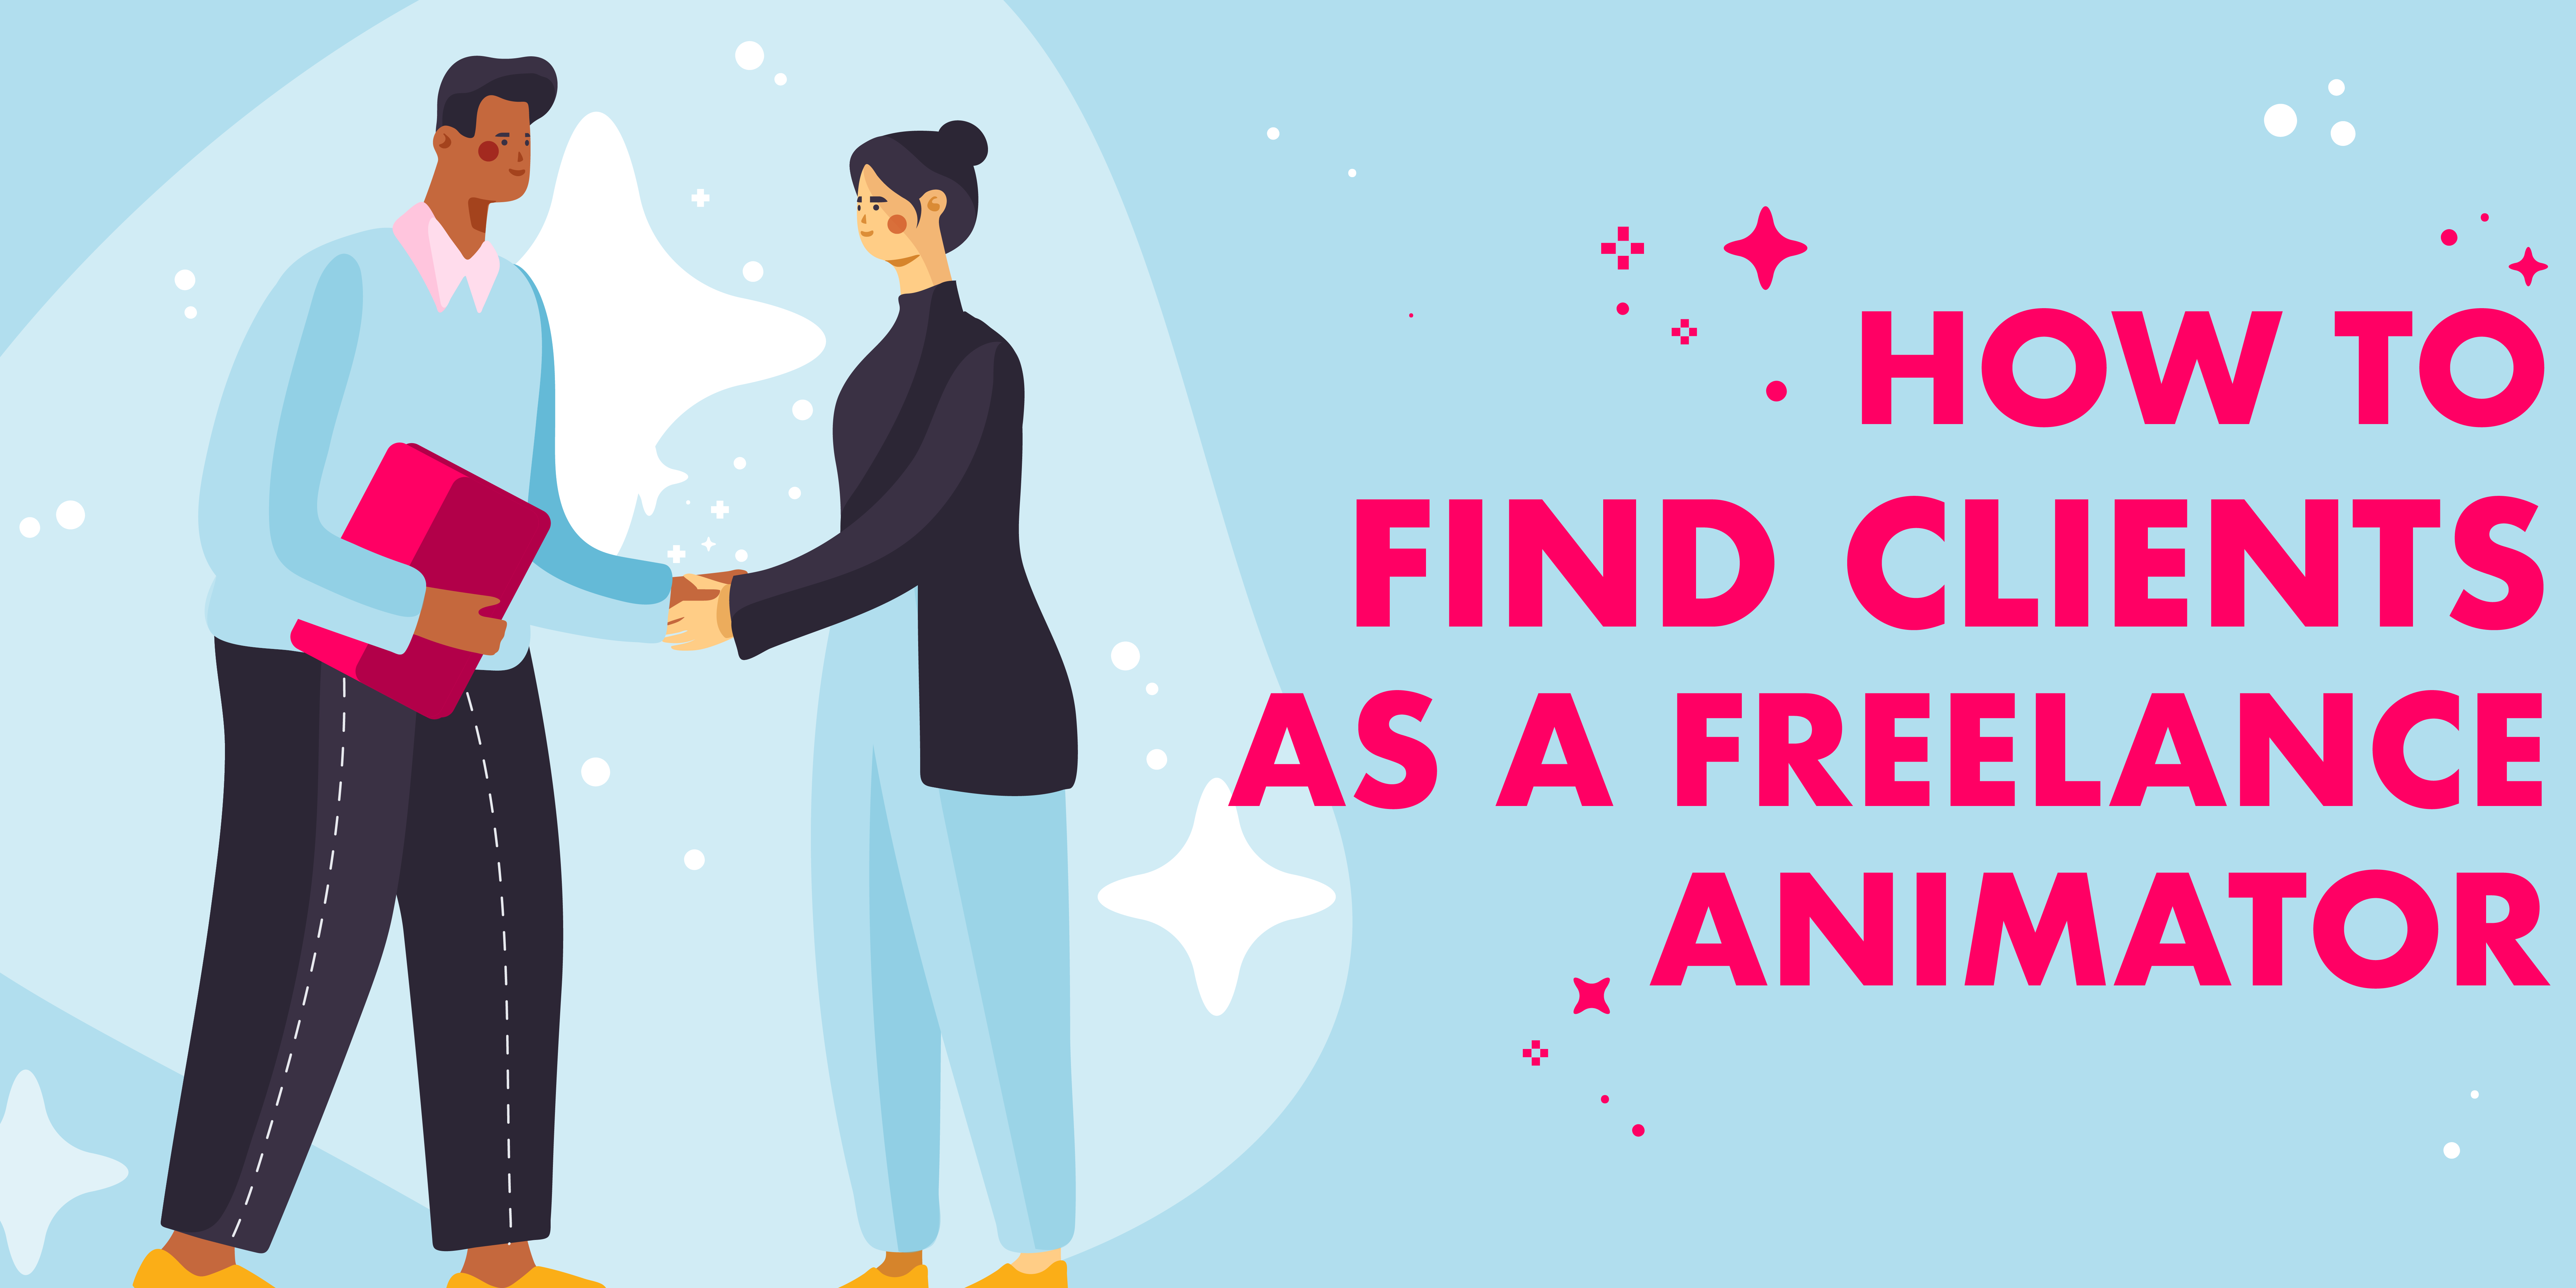 How to find clients as a freelance animator in 2021